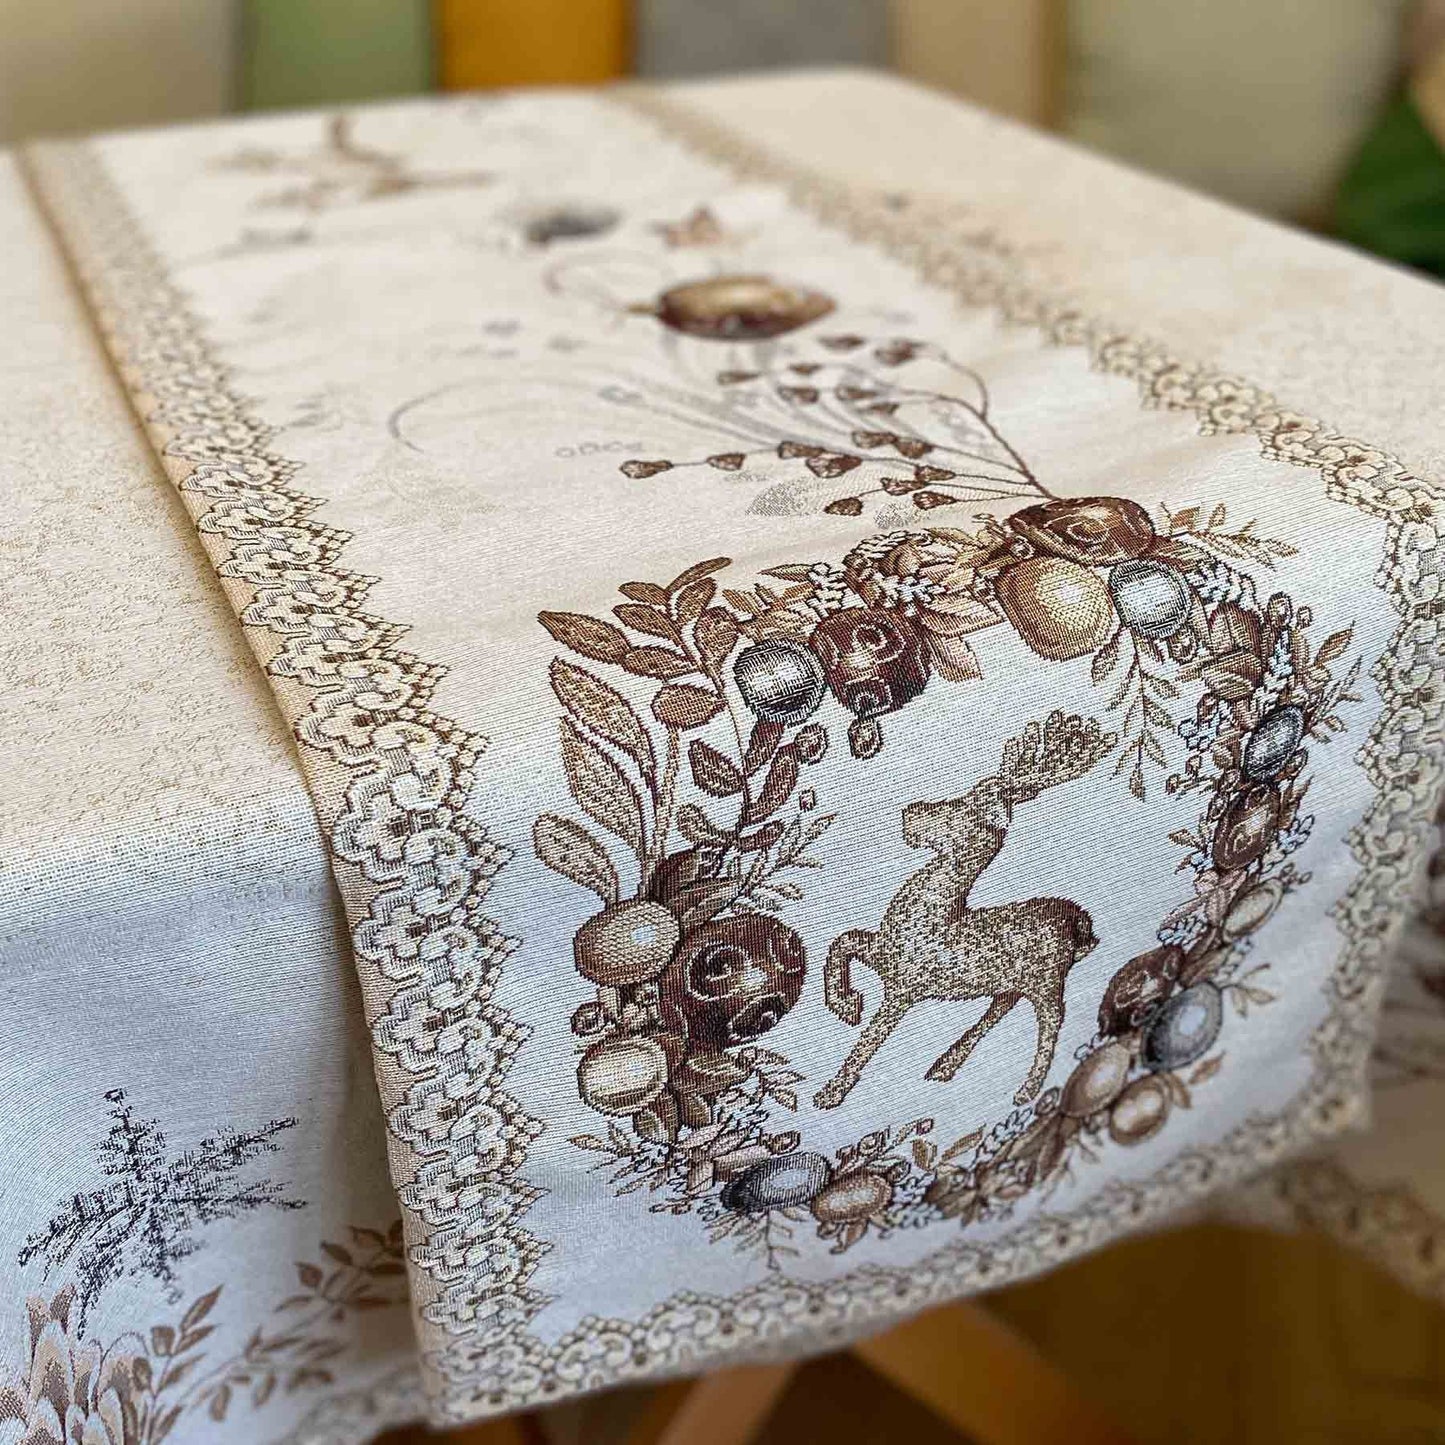 Beige And Gold Christmas Tapestry Tablecloth With Reindeer And X-mas Ornament. Festive Home Decor, Living Room Textile, Family Gift Idea.